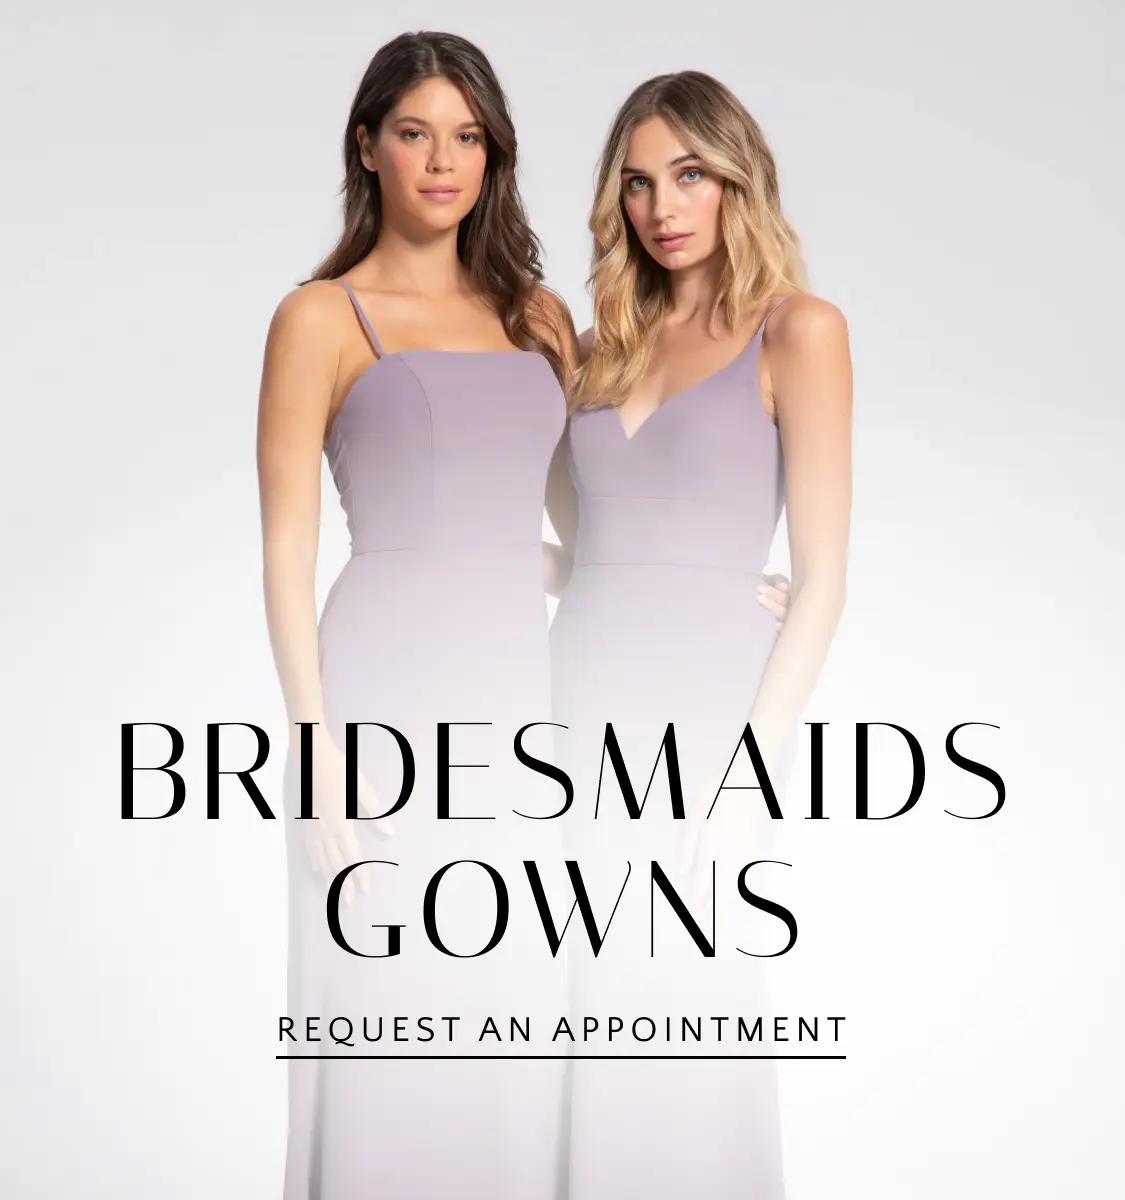 Bridesmaids gowns banner for mobile